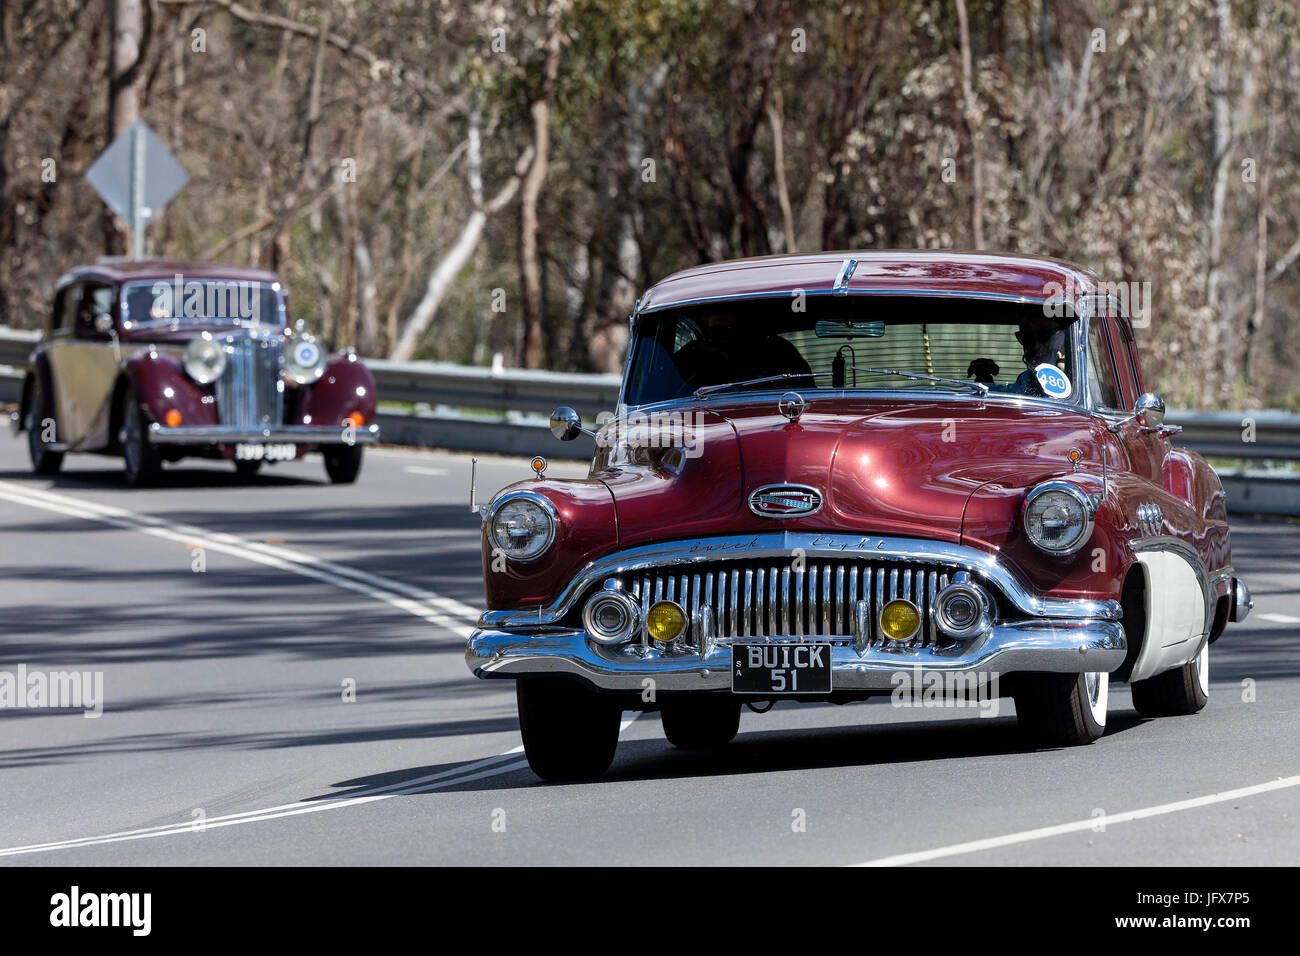 Vintage 1951 Buick Super Sedan driving on country roads near the town of Birdwood, South Australia. Stock Photo